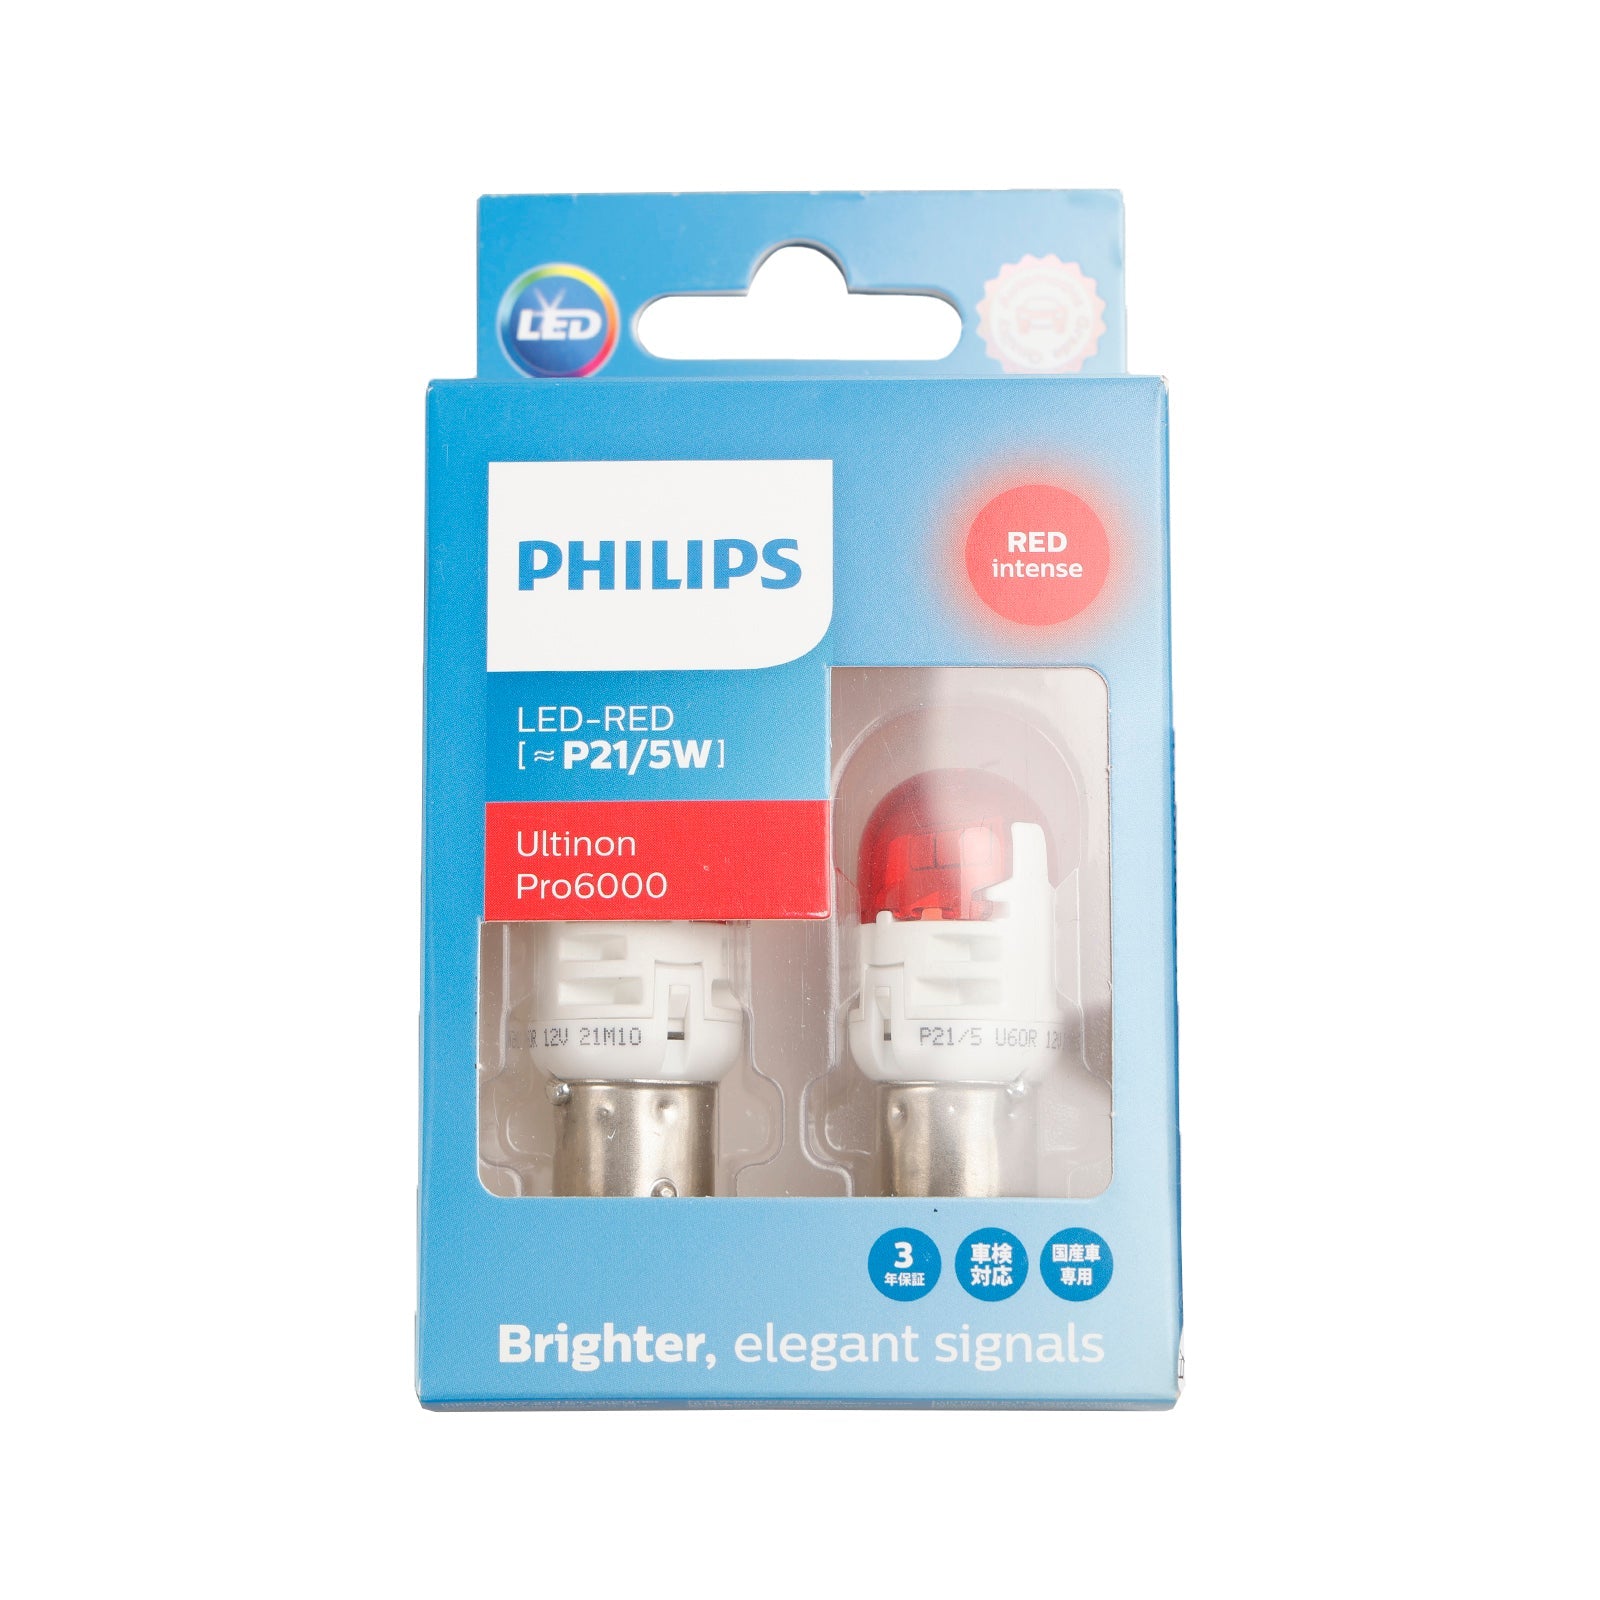 Pour Philips 11499RU60X2 Ultinon Pro6000 LED-ROUGE P21/5W Rouge intense 75/15lm